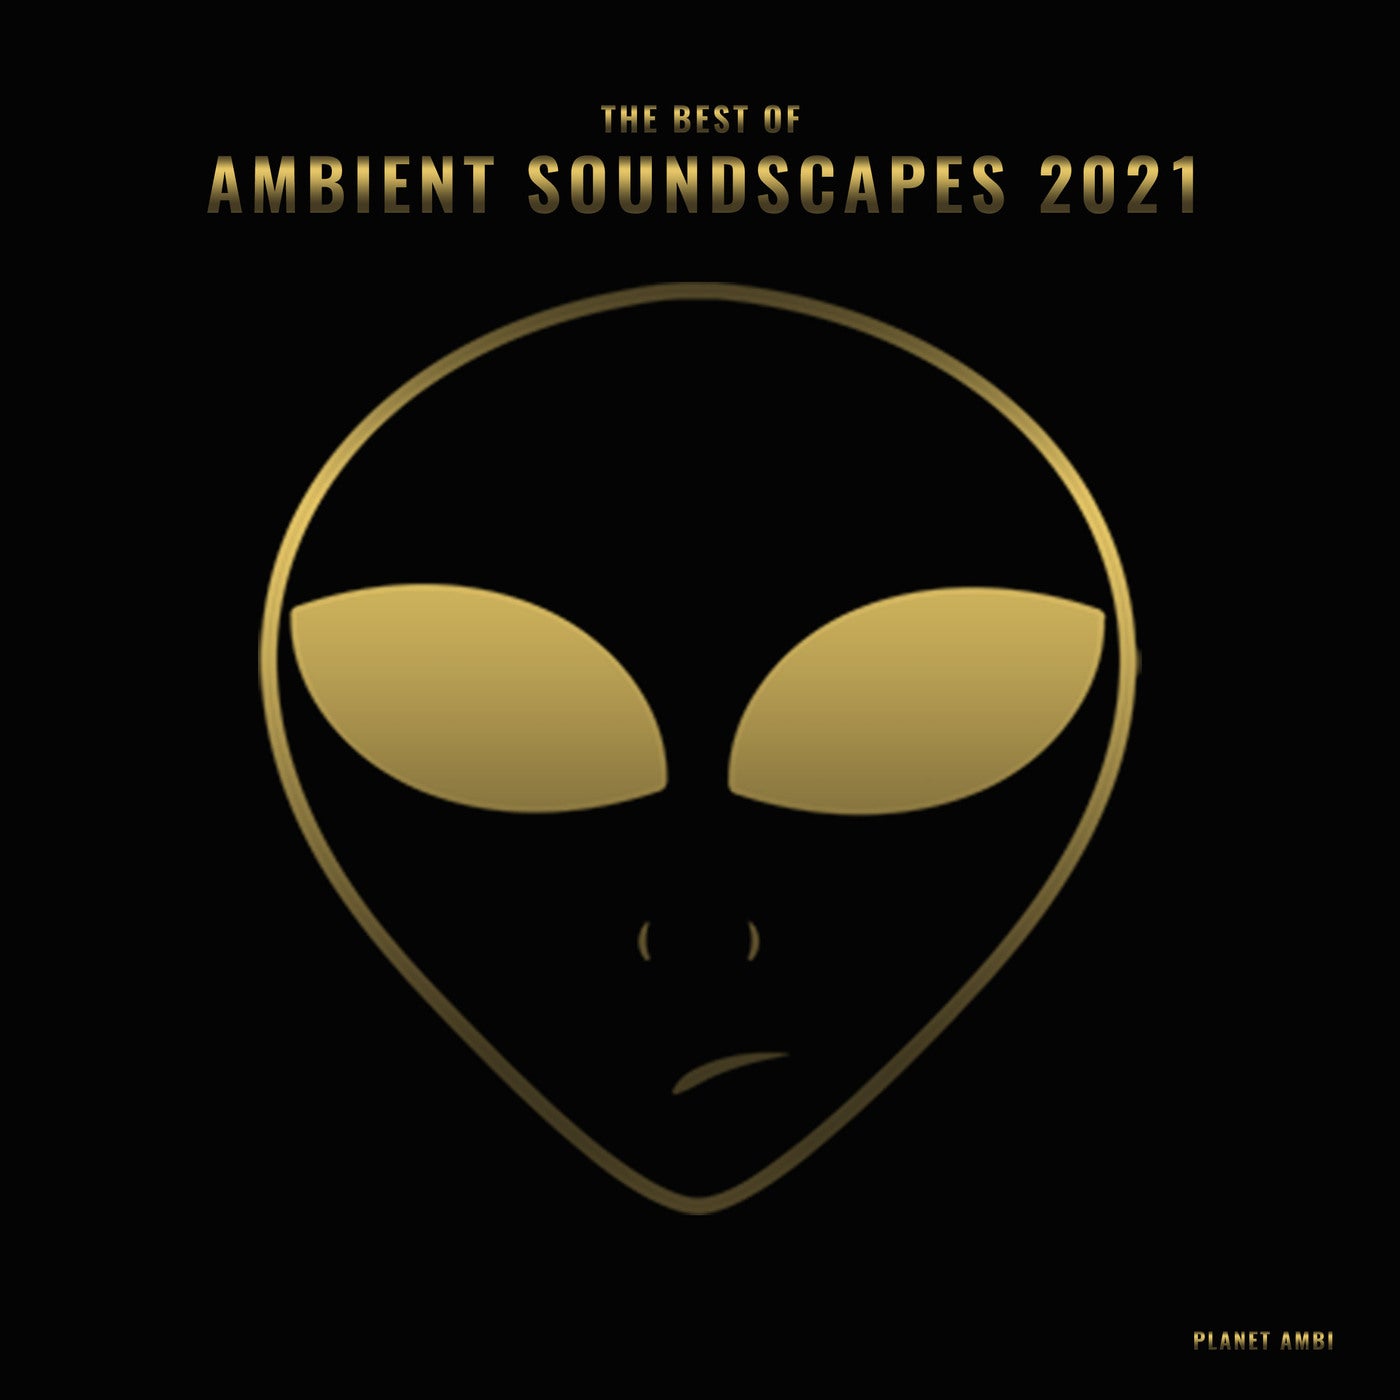 The Best of Ambient Soundscapes 2021